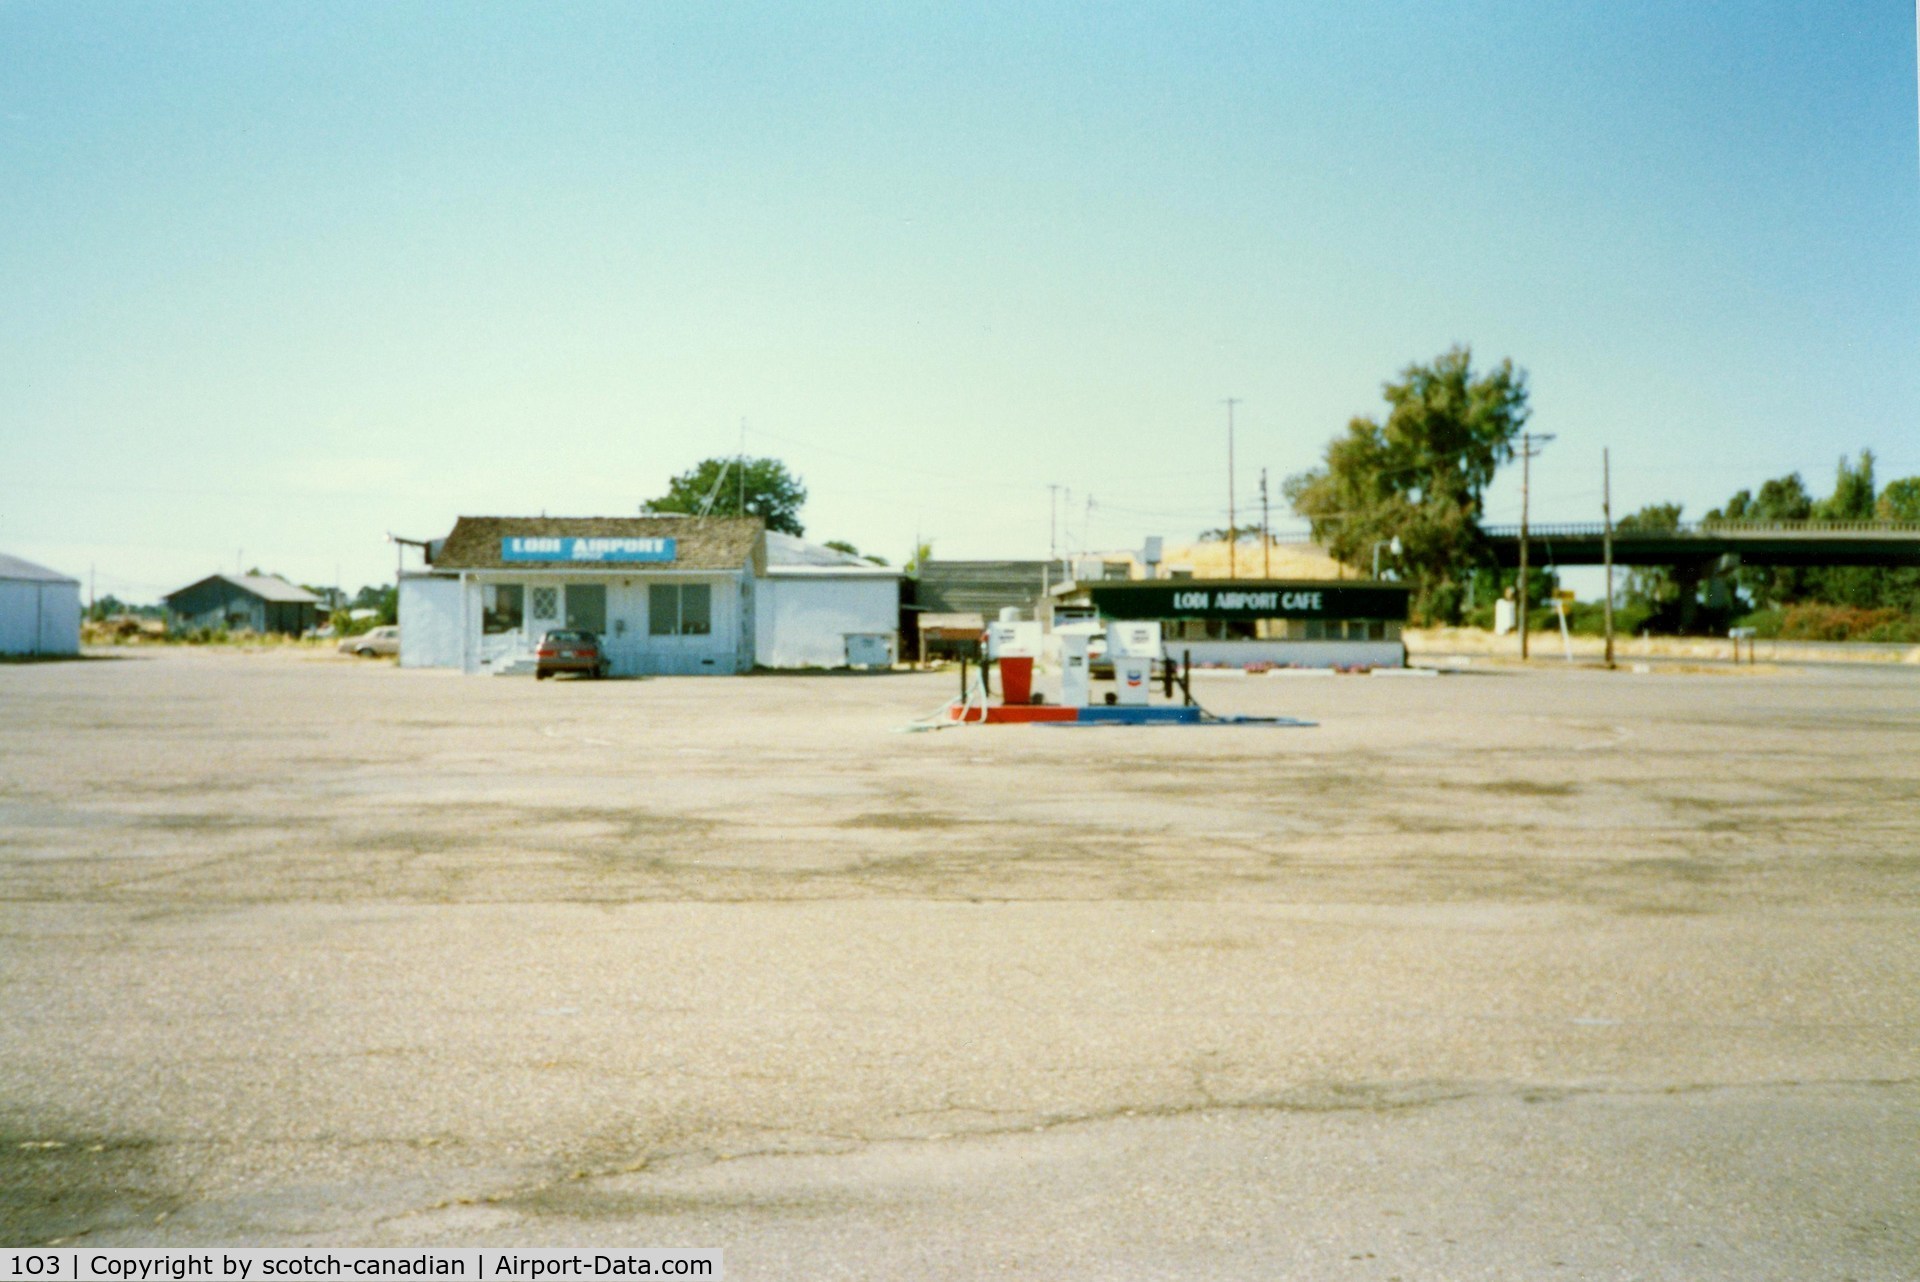 Lodi Airport (1O3) - Airport Fuel Pumps, Office and Cafe at Lodi Airport, Lodi, CA - July 1989